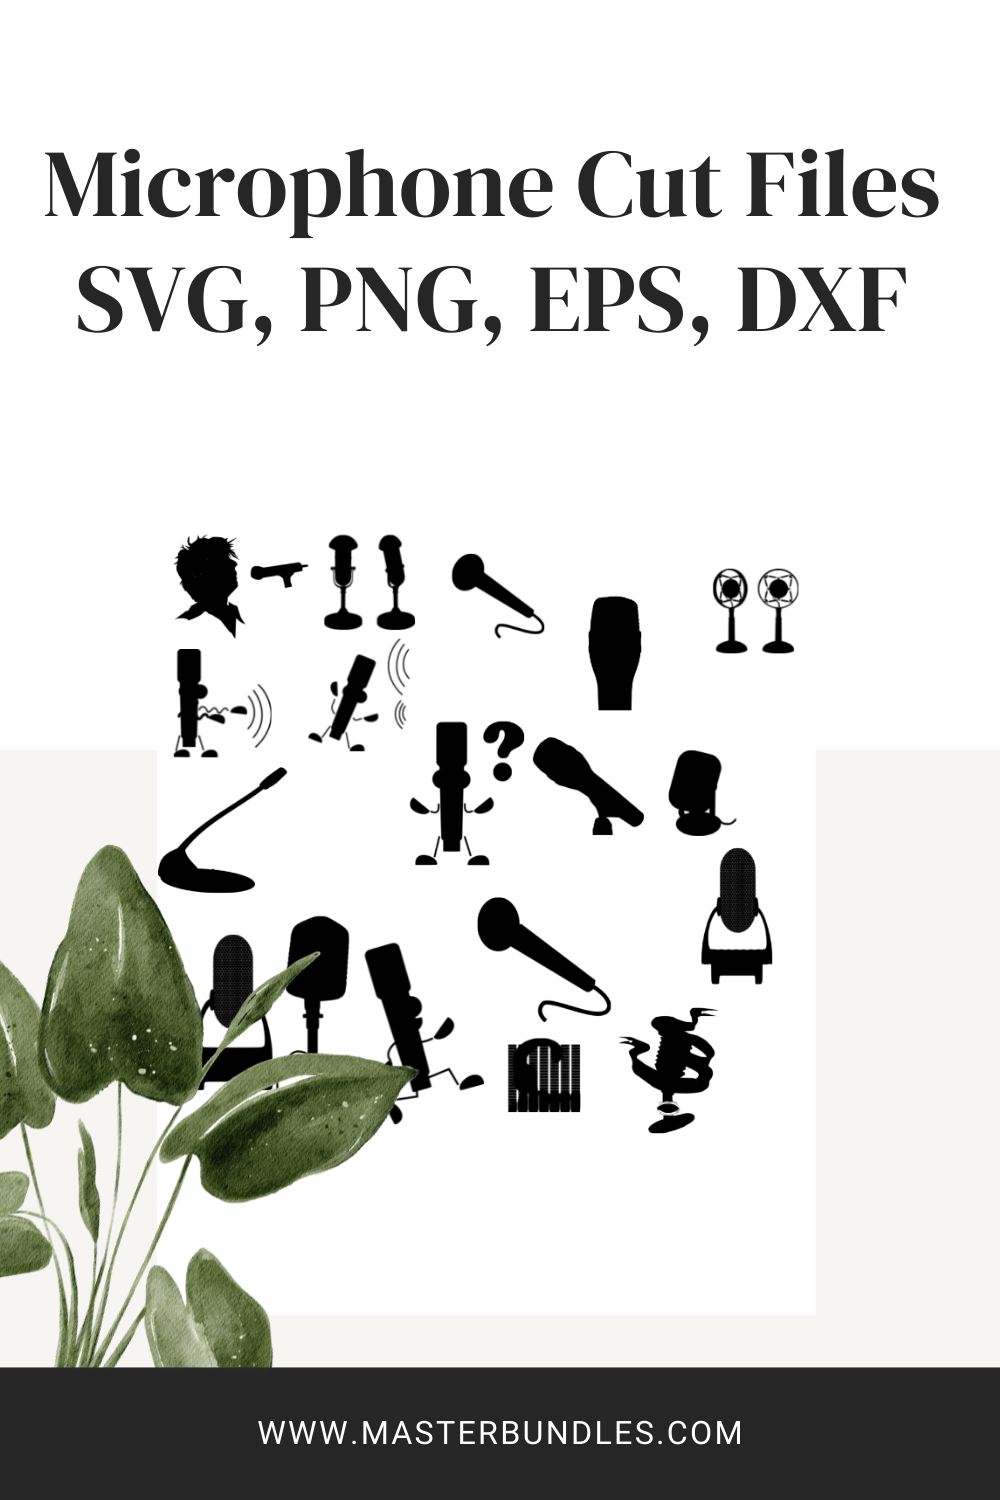 Microphone Silhouette Cut Files (SVG, PNG, EPS, DXF) pinterest.